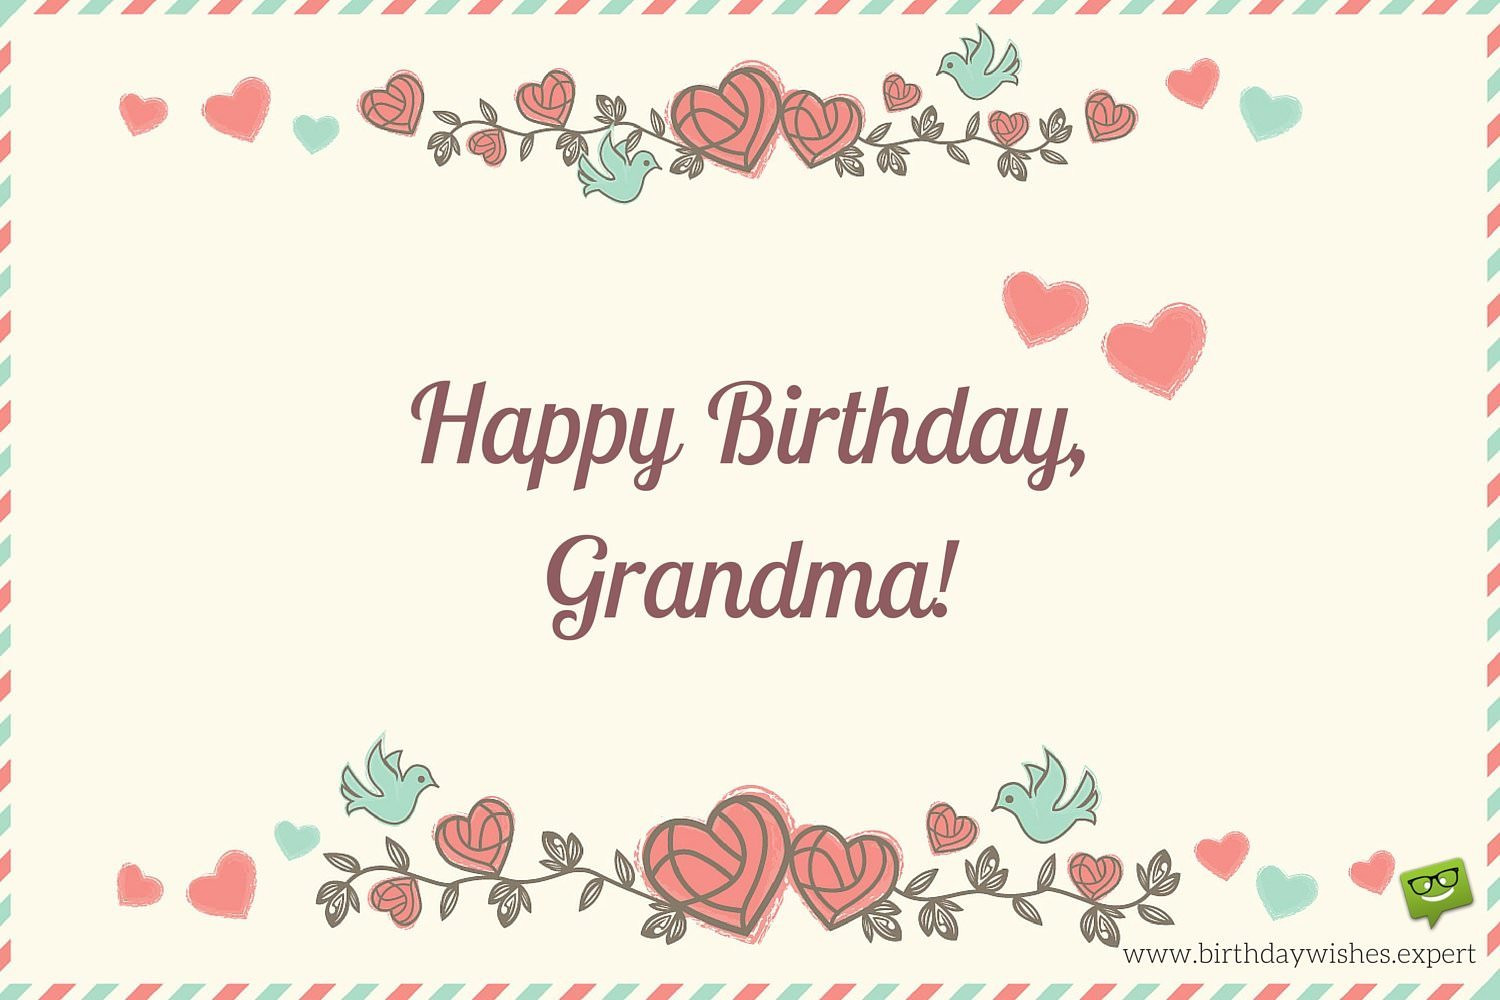 Birthday Wishes For Grandma
 Happy Birthday Grandma on image of an old envelope with